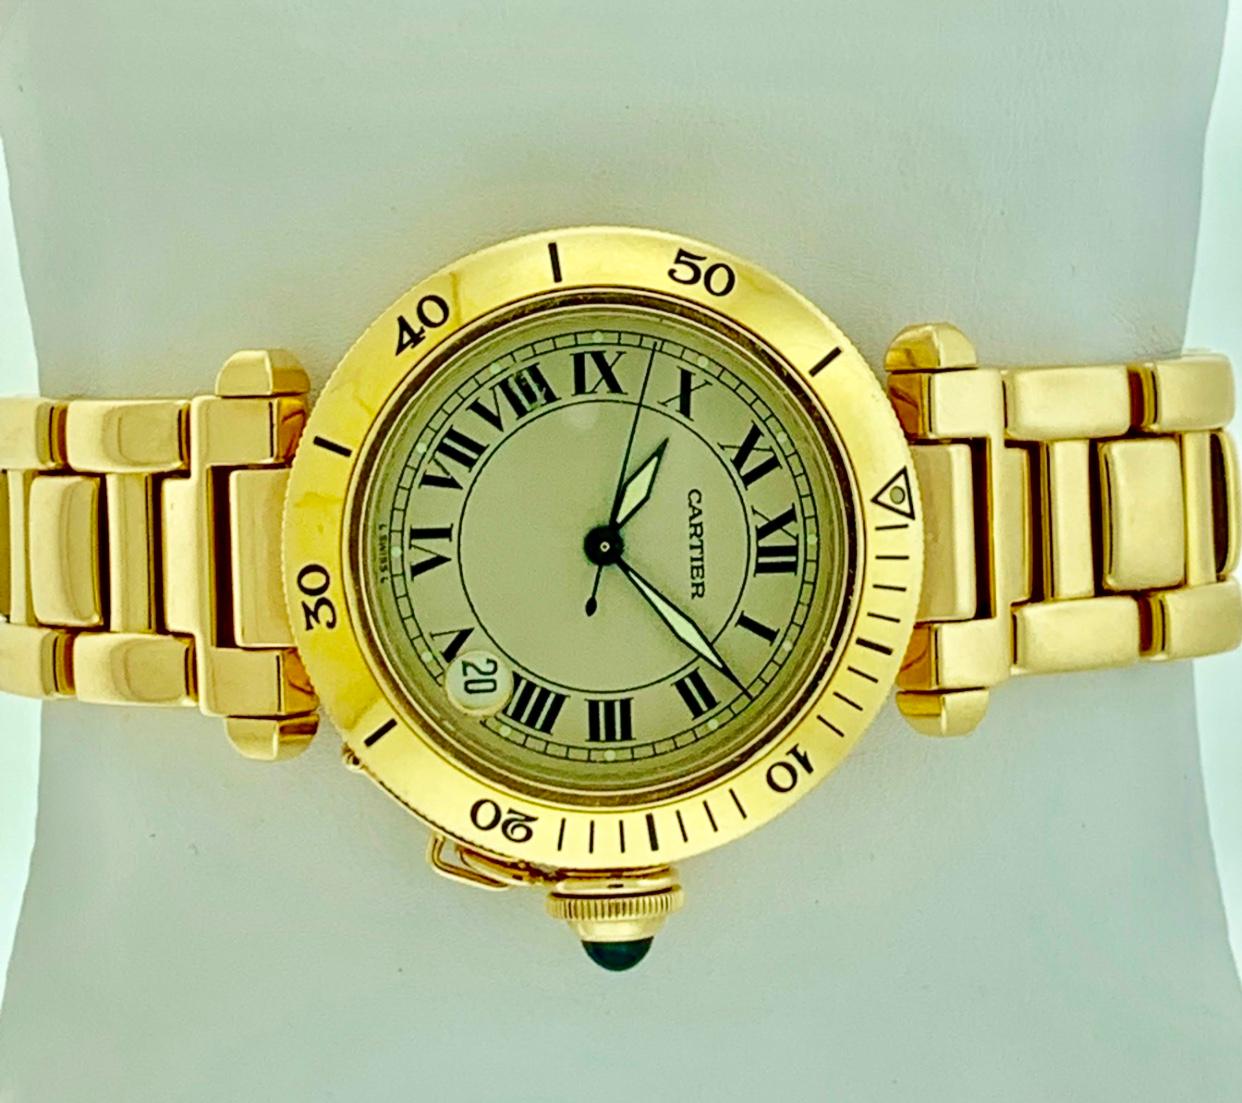 150 Gm 18 Karat Solid Yellow Gold Cartier Pasha Automatic Watch Water Resistant 9